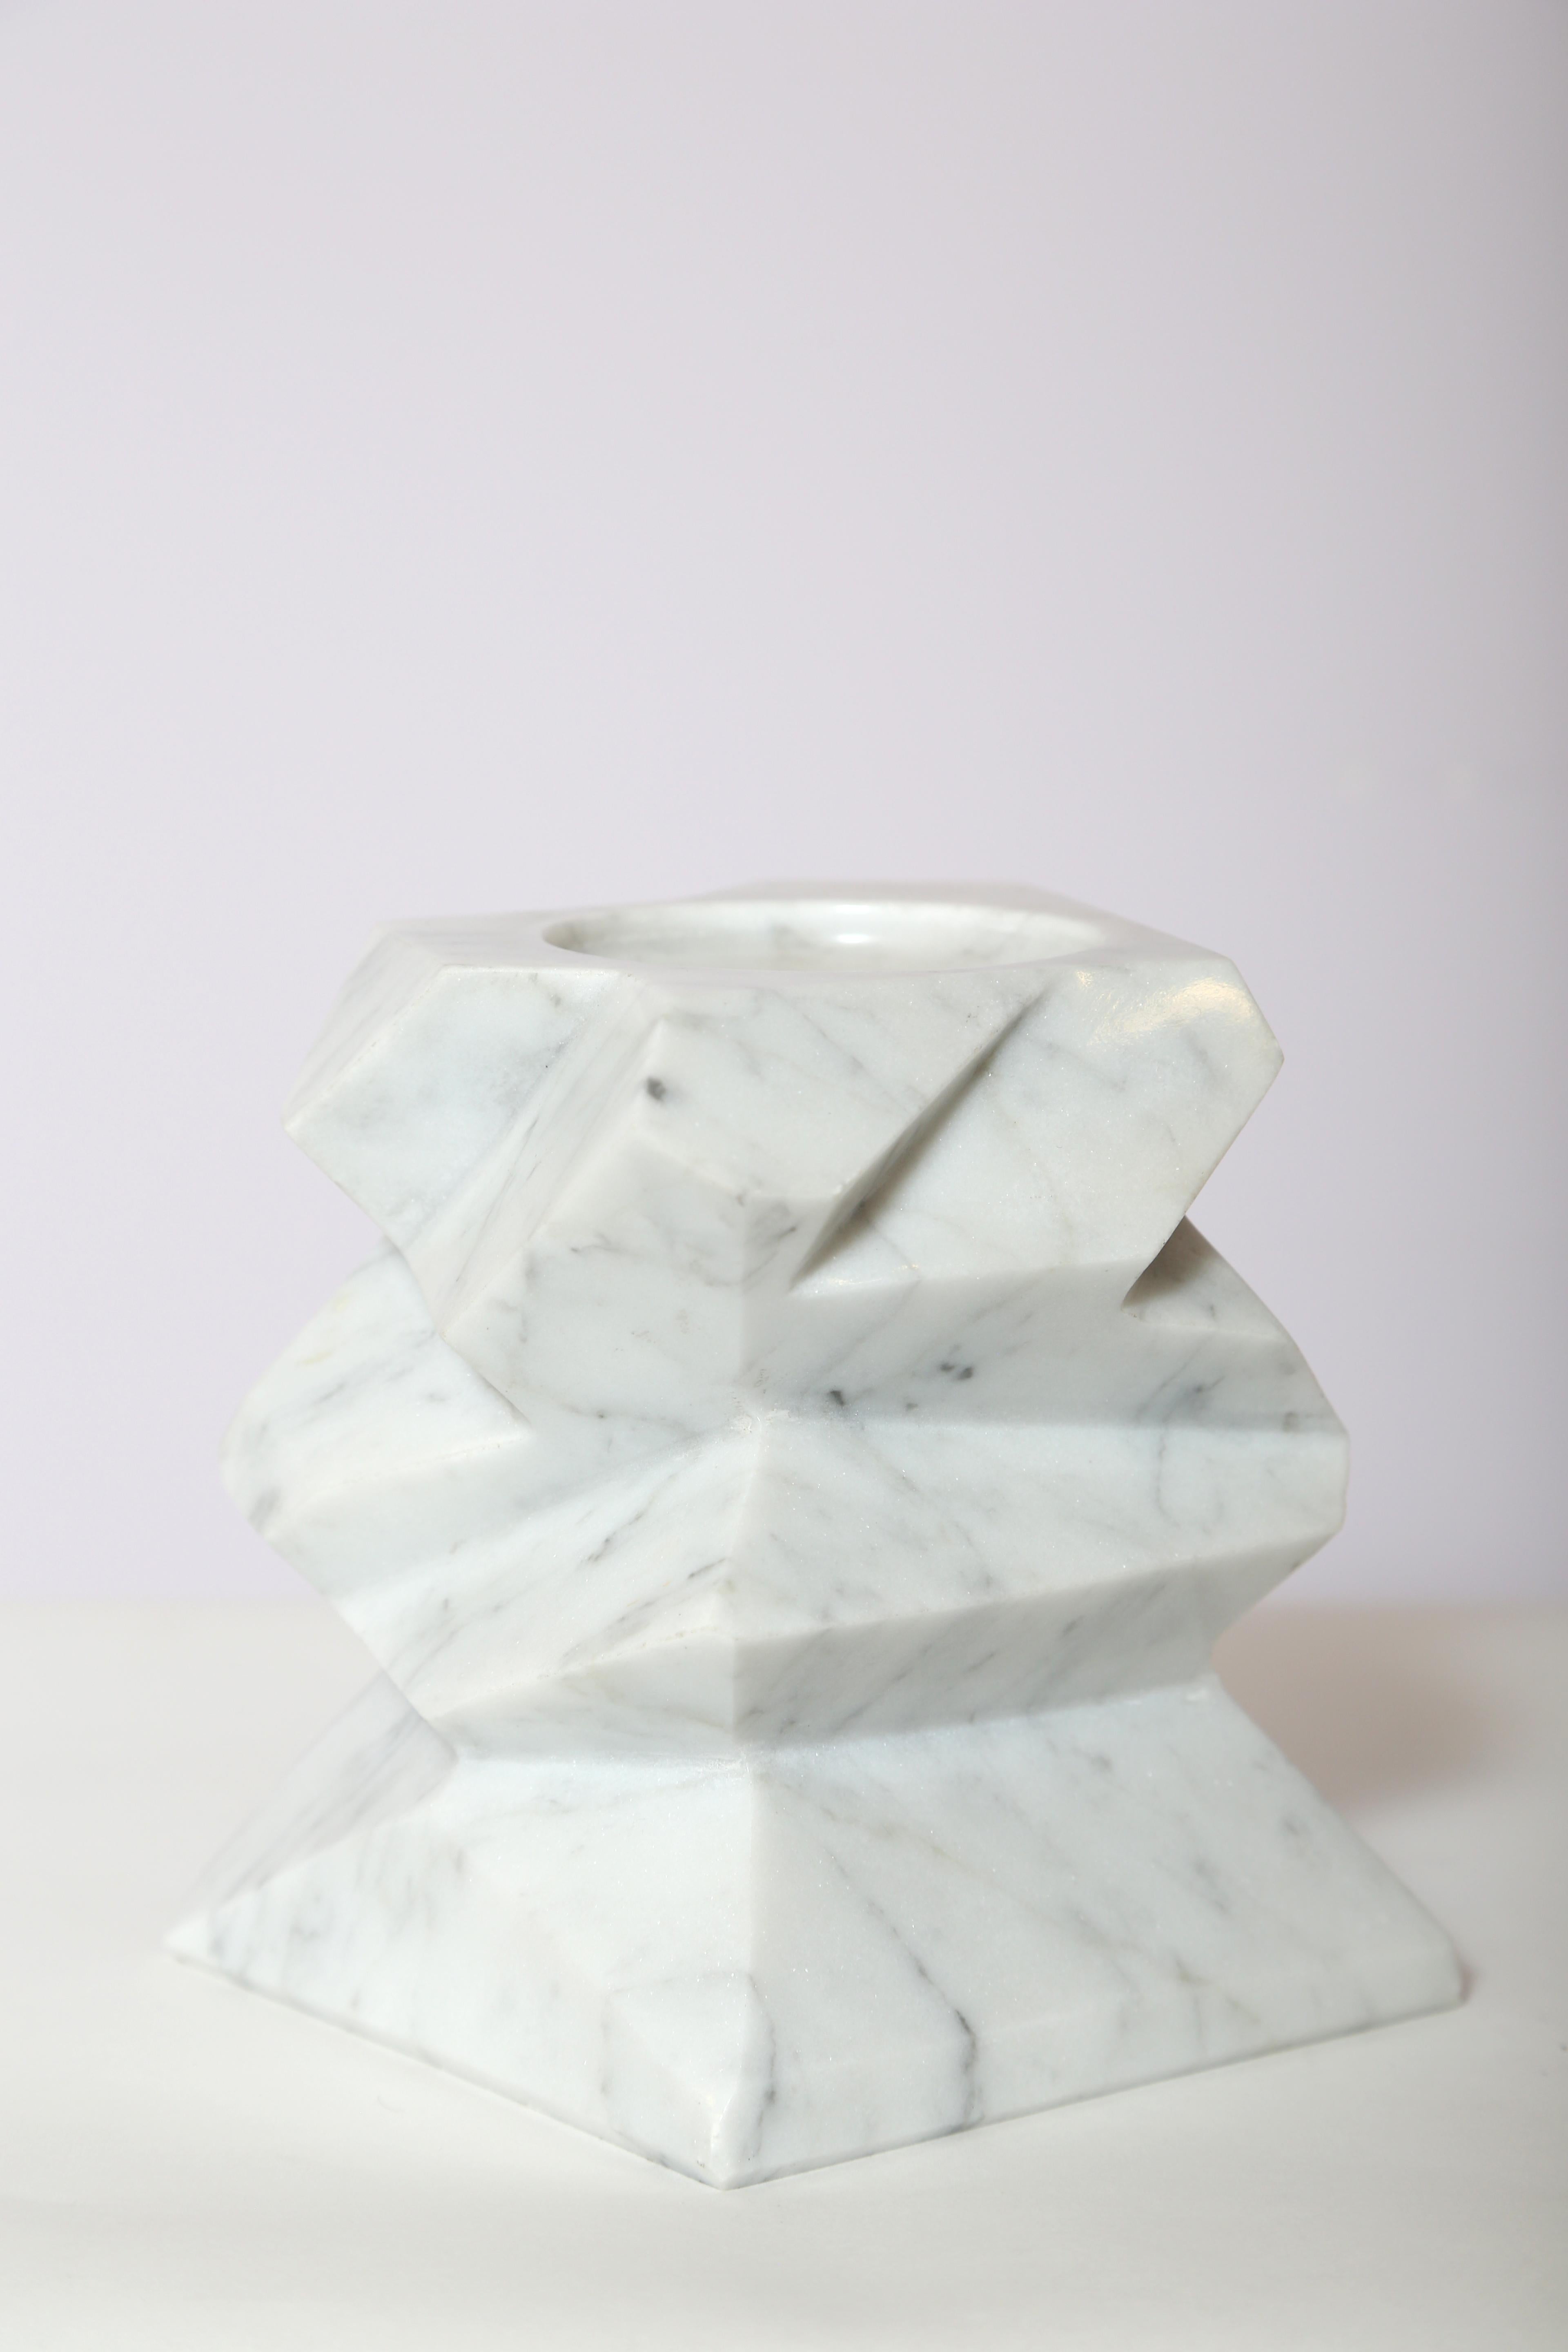 Italian The Marble House Rock Candleholder in White Carrara Marble, Handmade in Italy For Sale